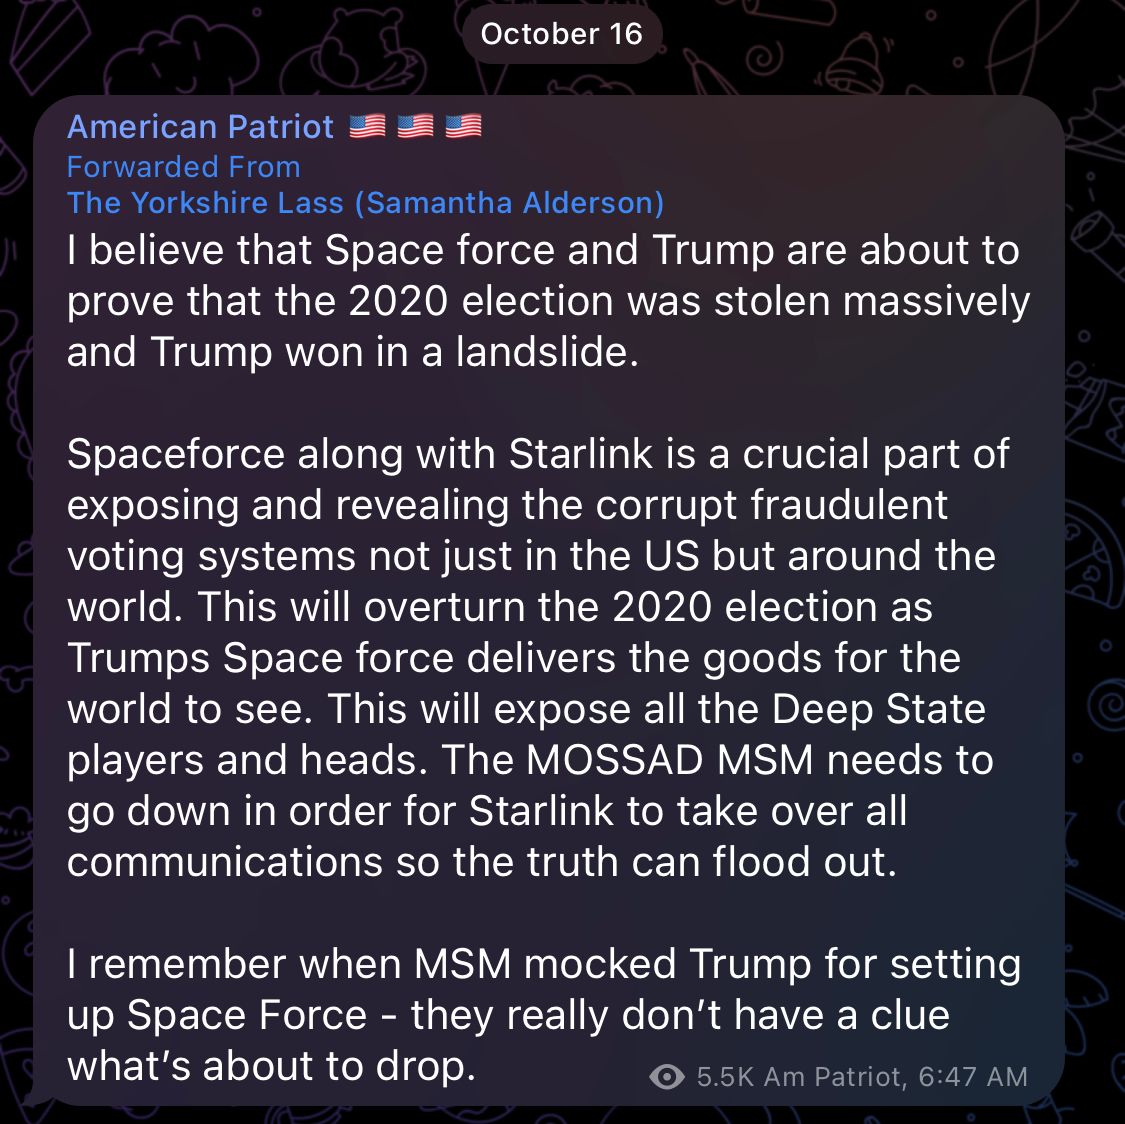 I believe that Space force and Trump are about to prove that the 2020 election was stolen massively and Trump won in a landslide.